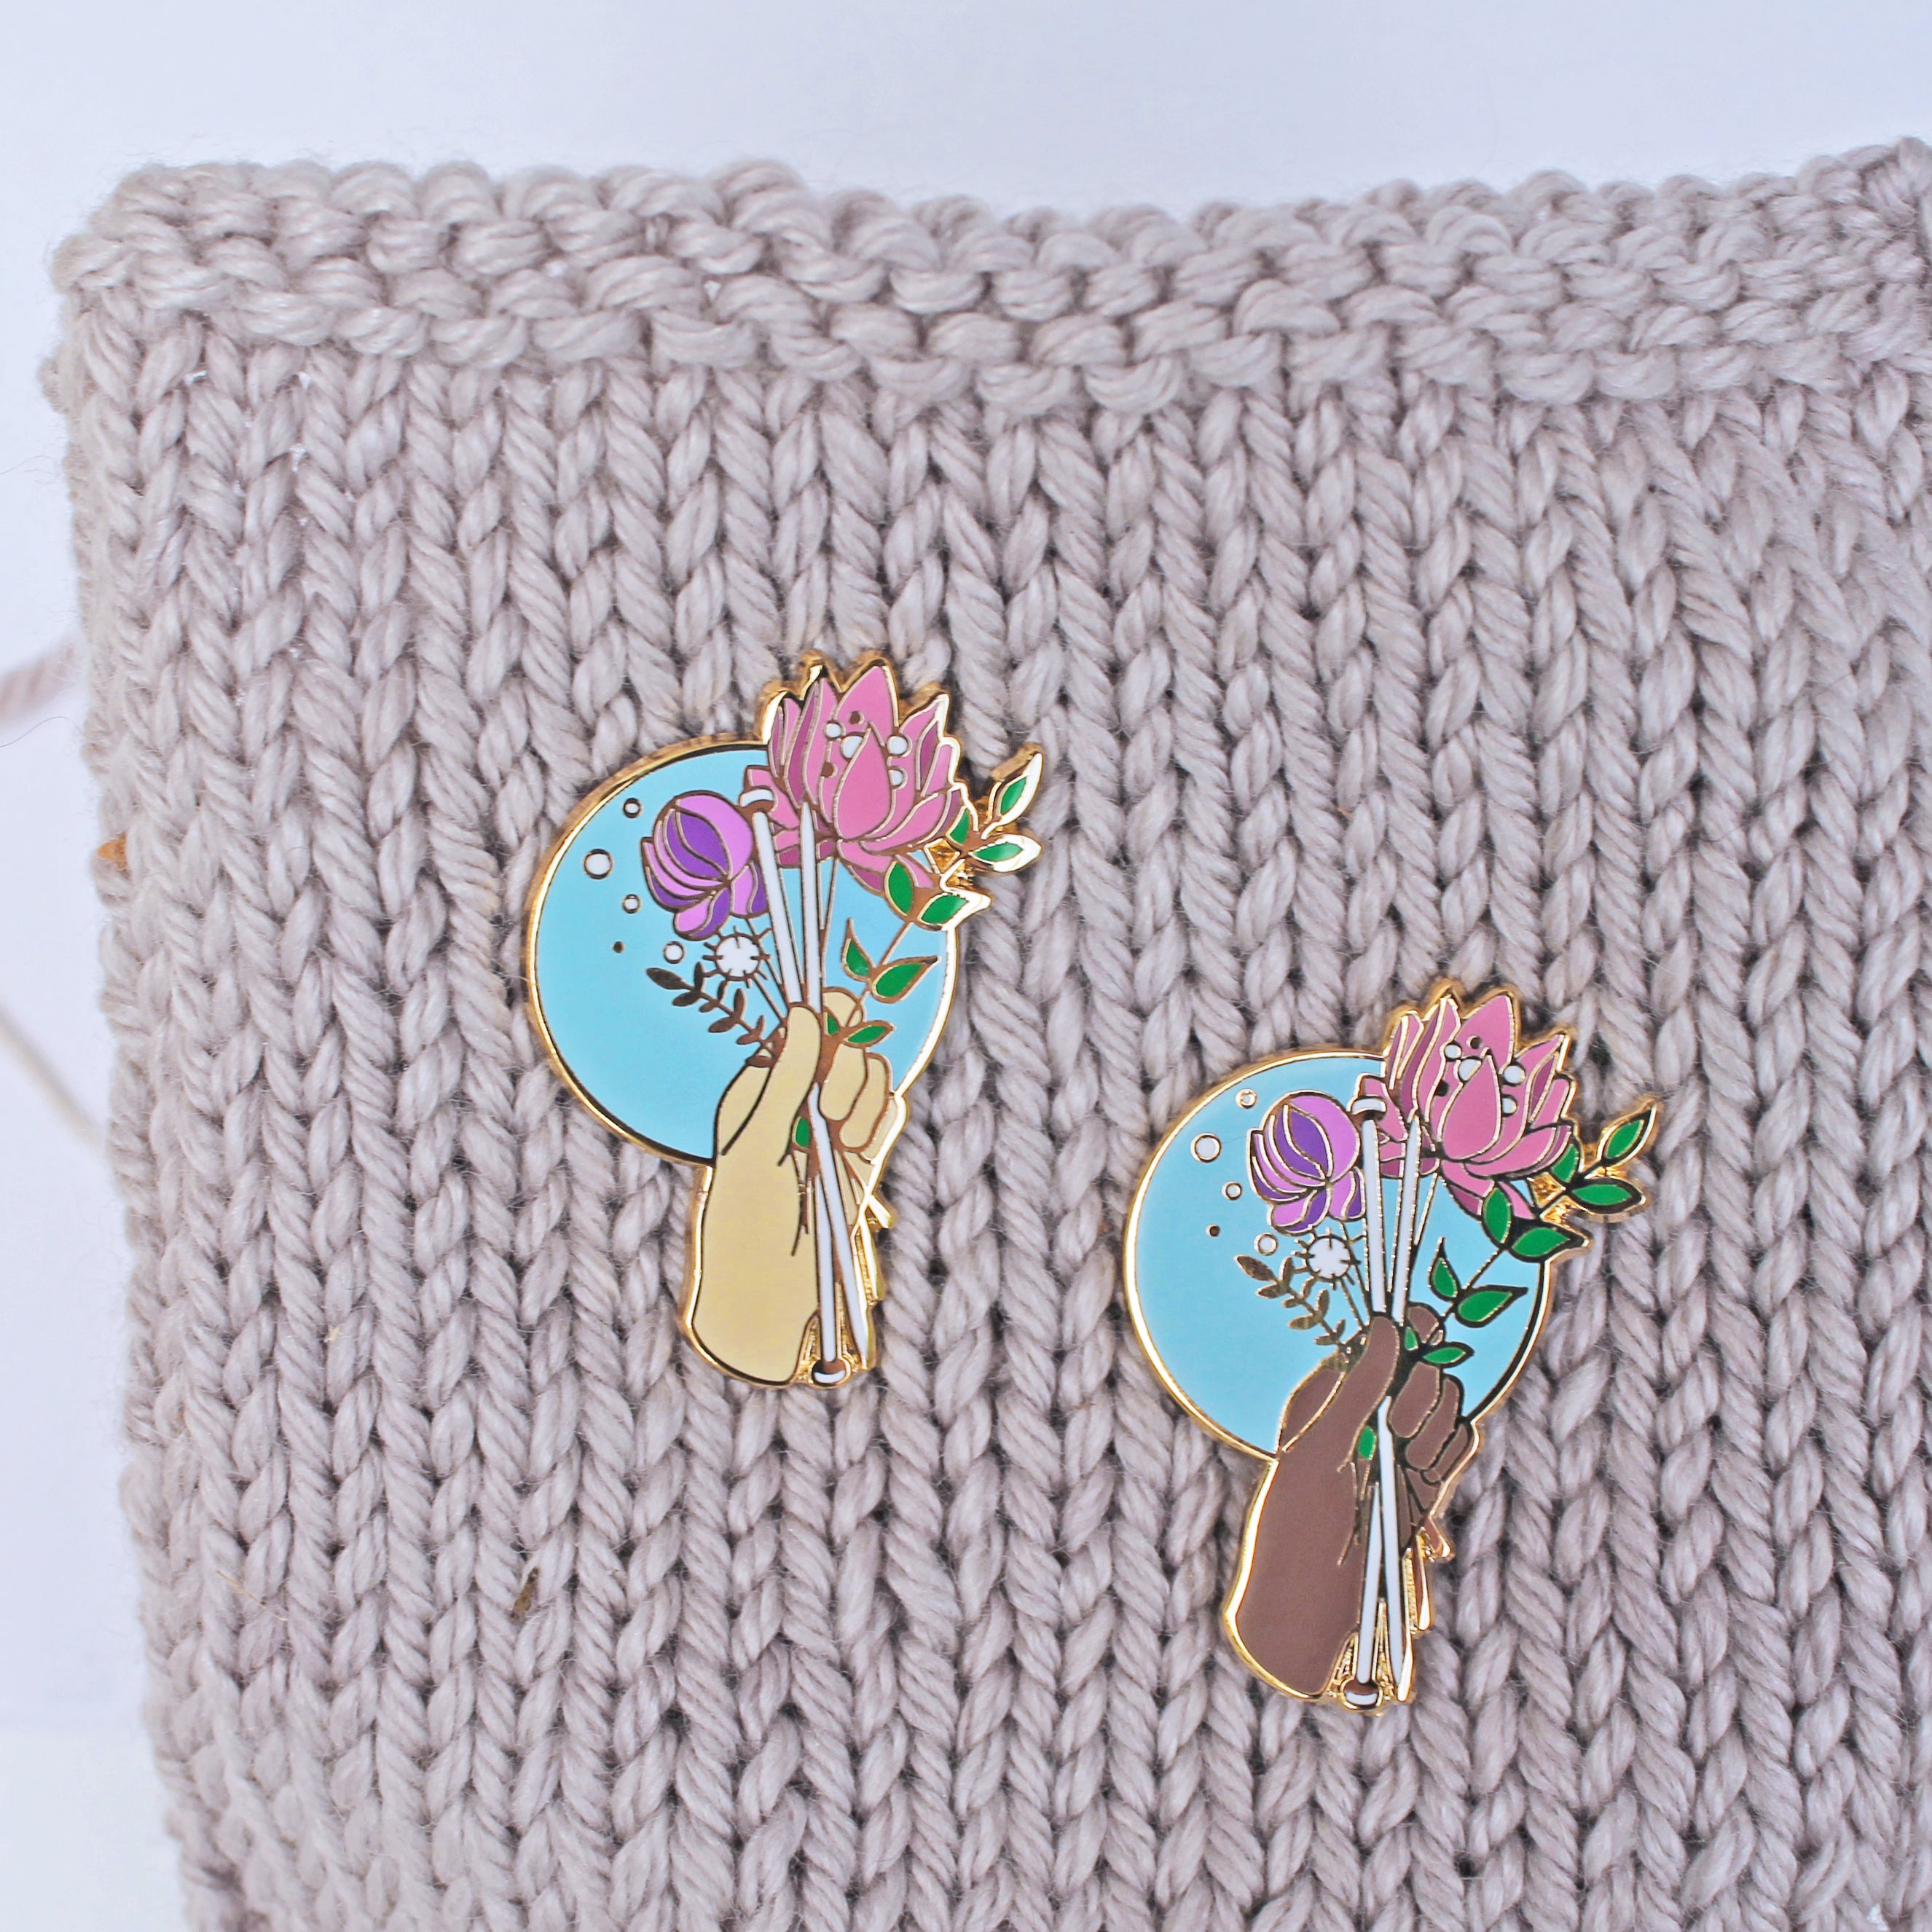 Floral enamel pin for knitters. Knitting needles being held with a bouquet of flowers, available in multiple skin tones.